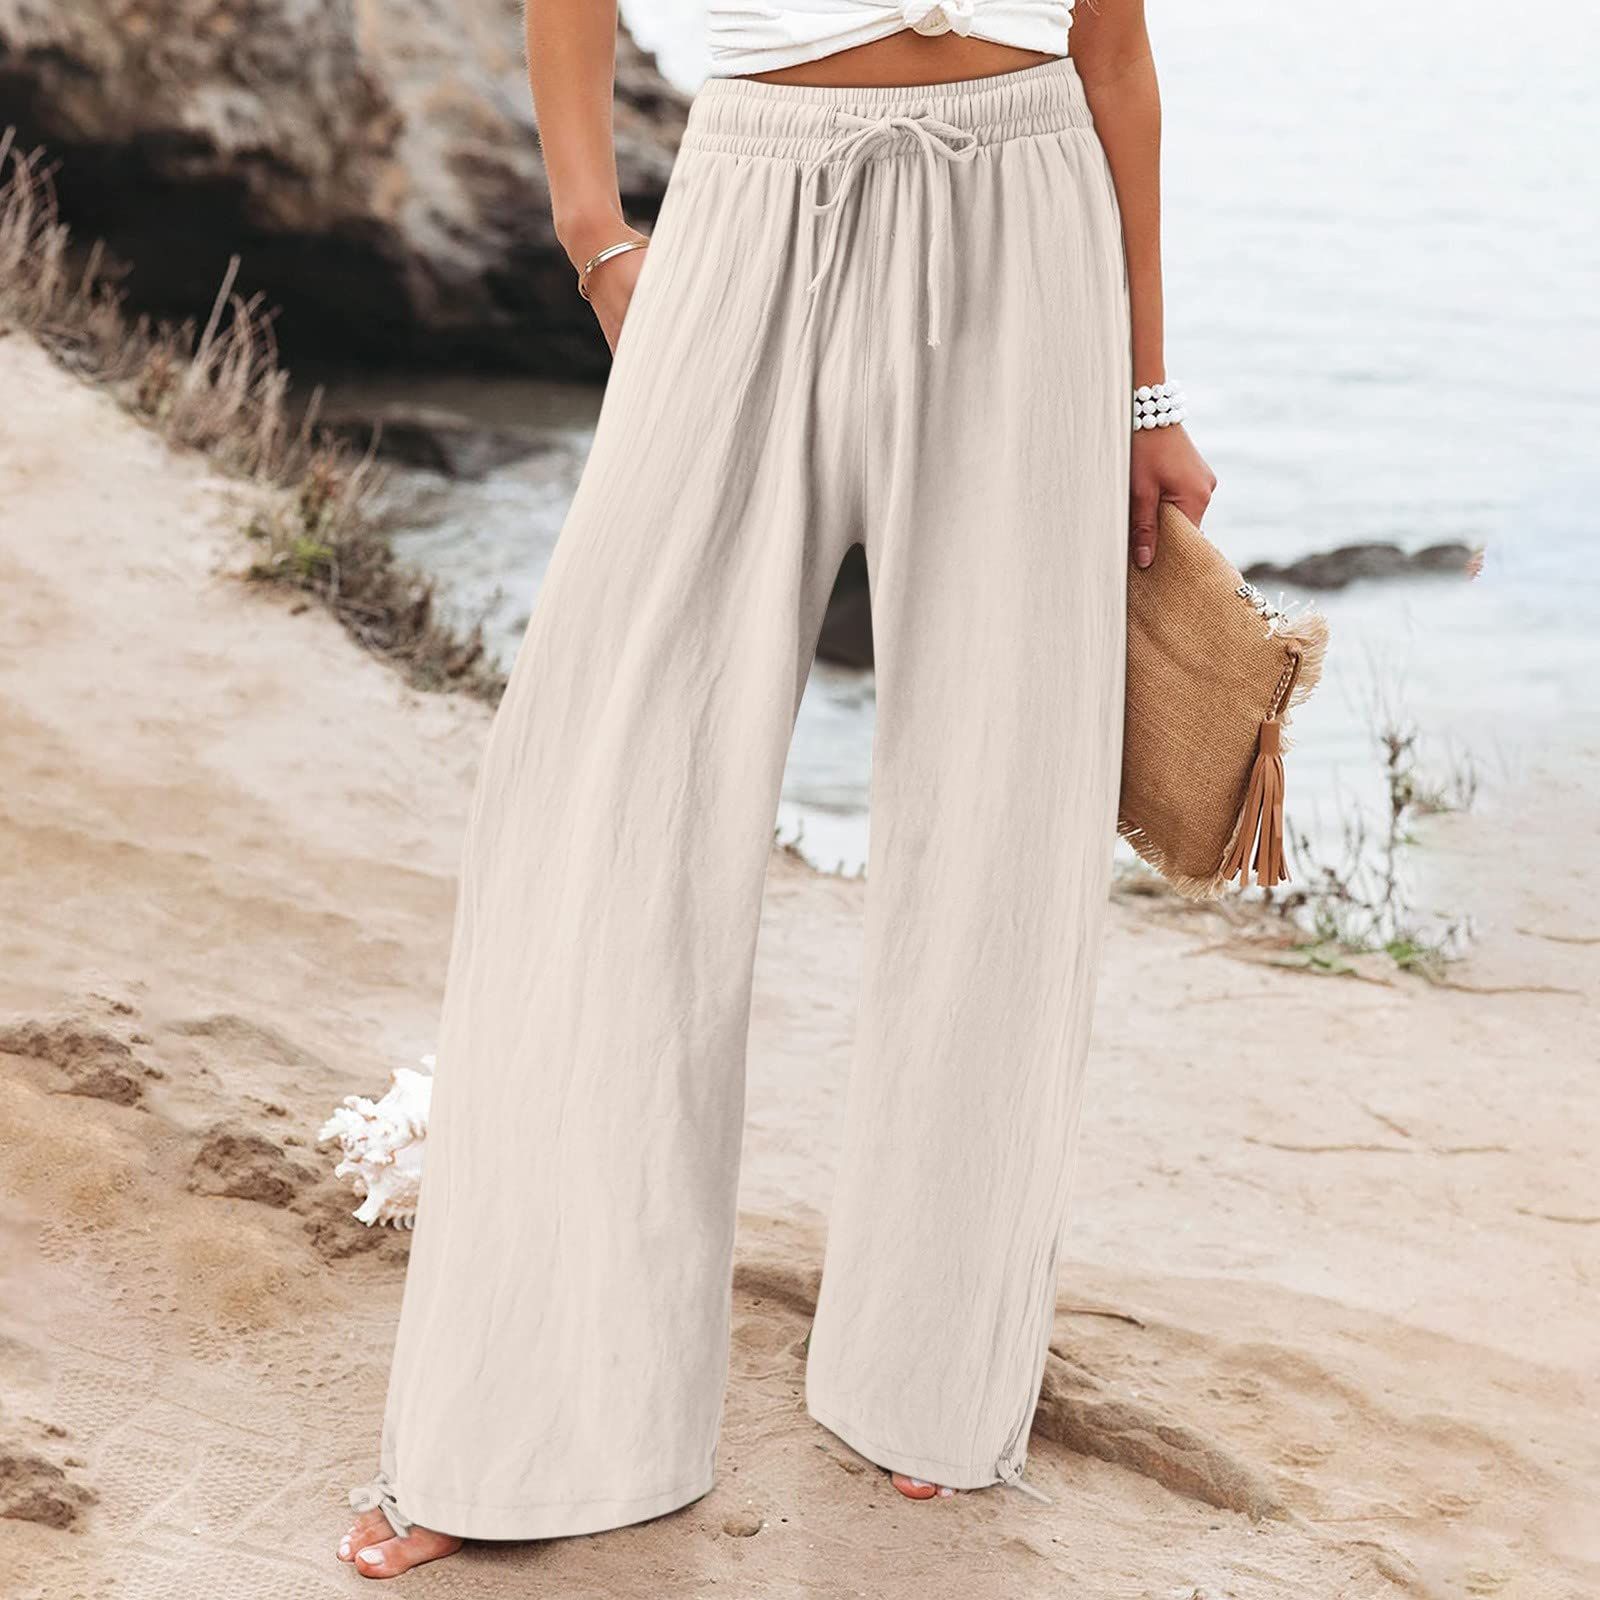 21 Relaxed-Fit Pants for Women That Are So Comfortable | Who What Wear